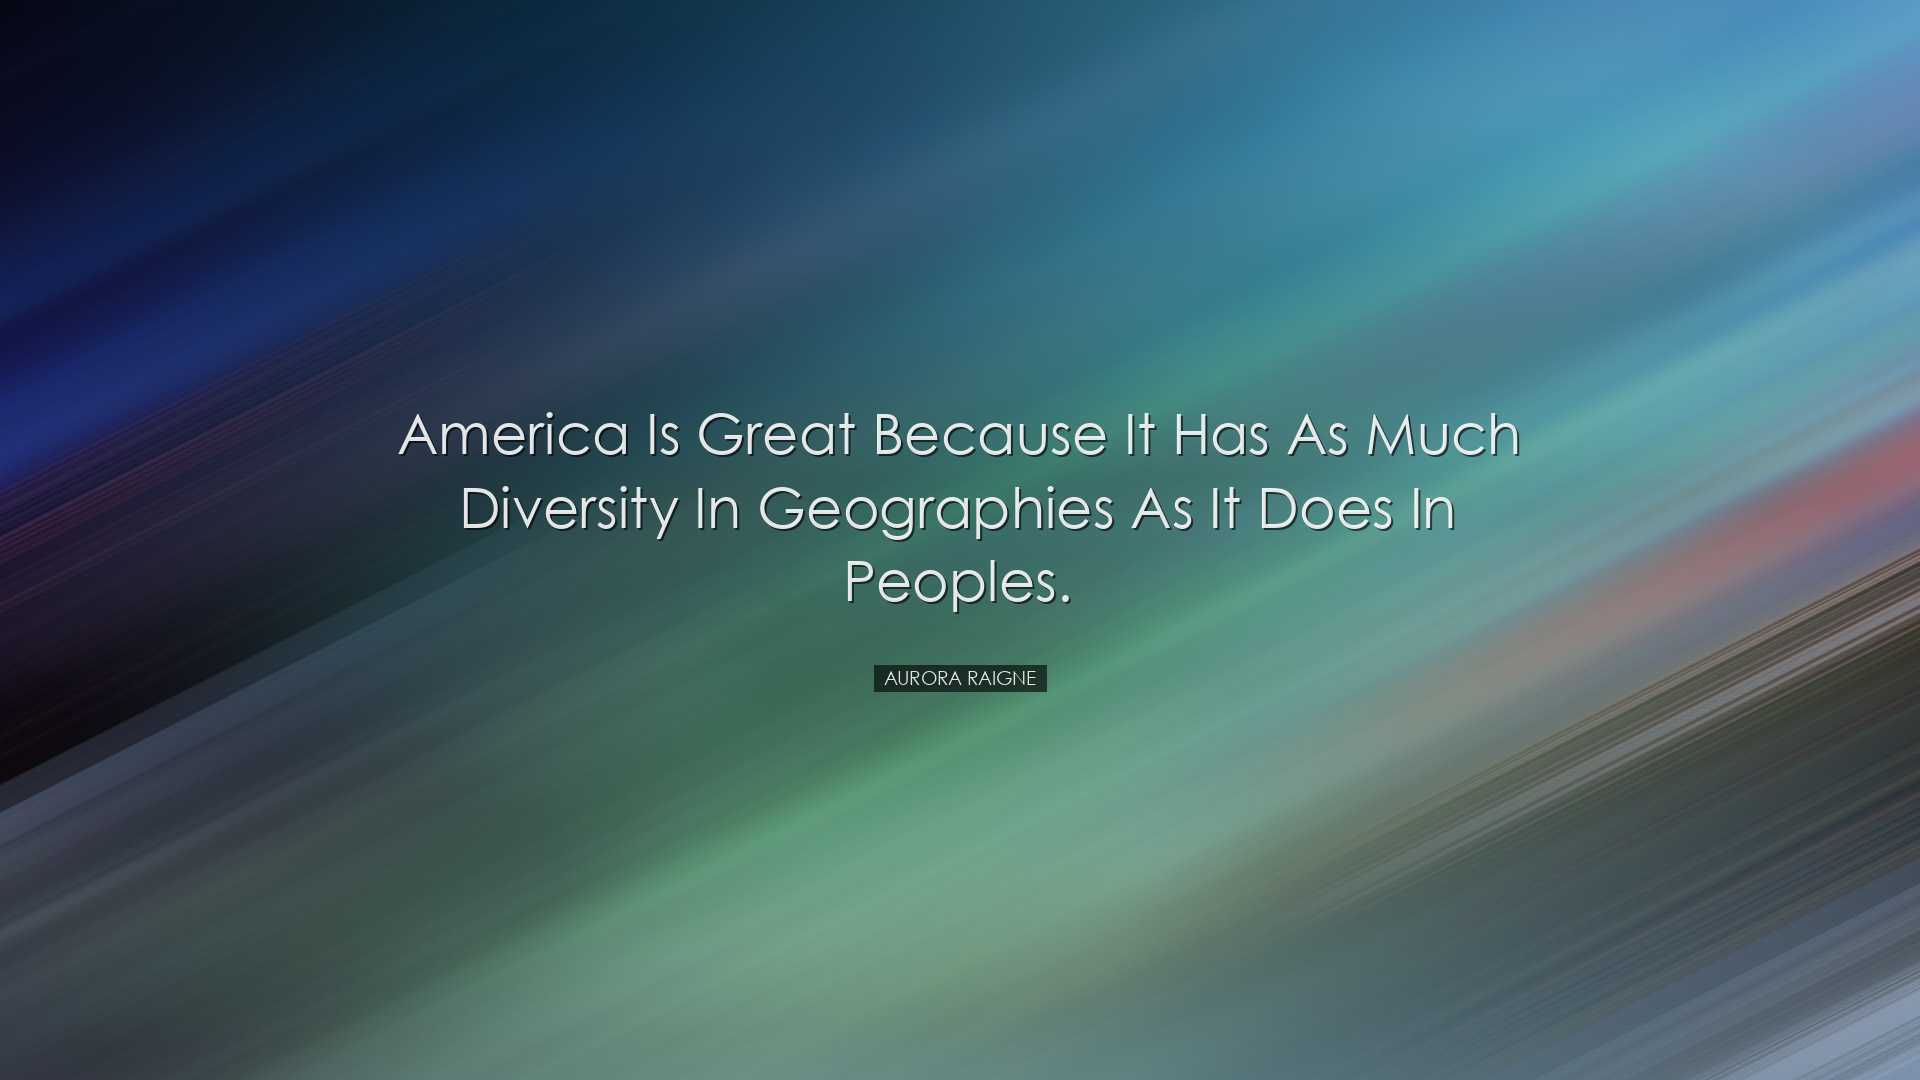 America is great because it has as much diversity in geographies a